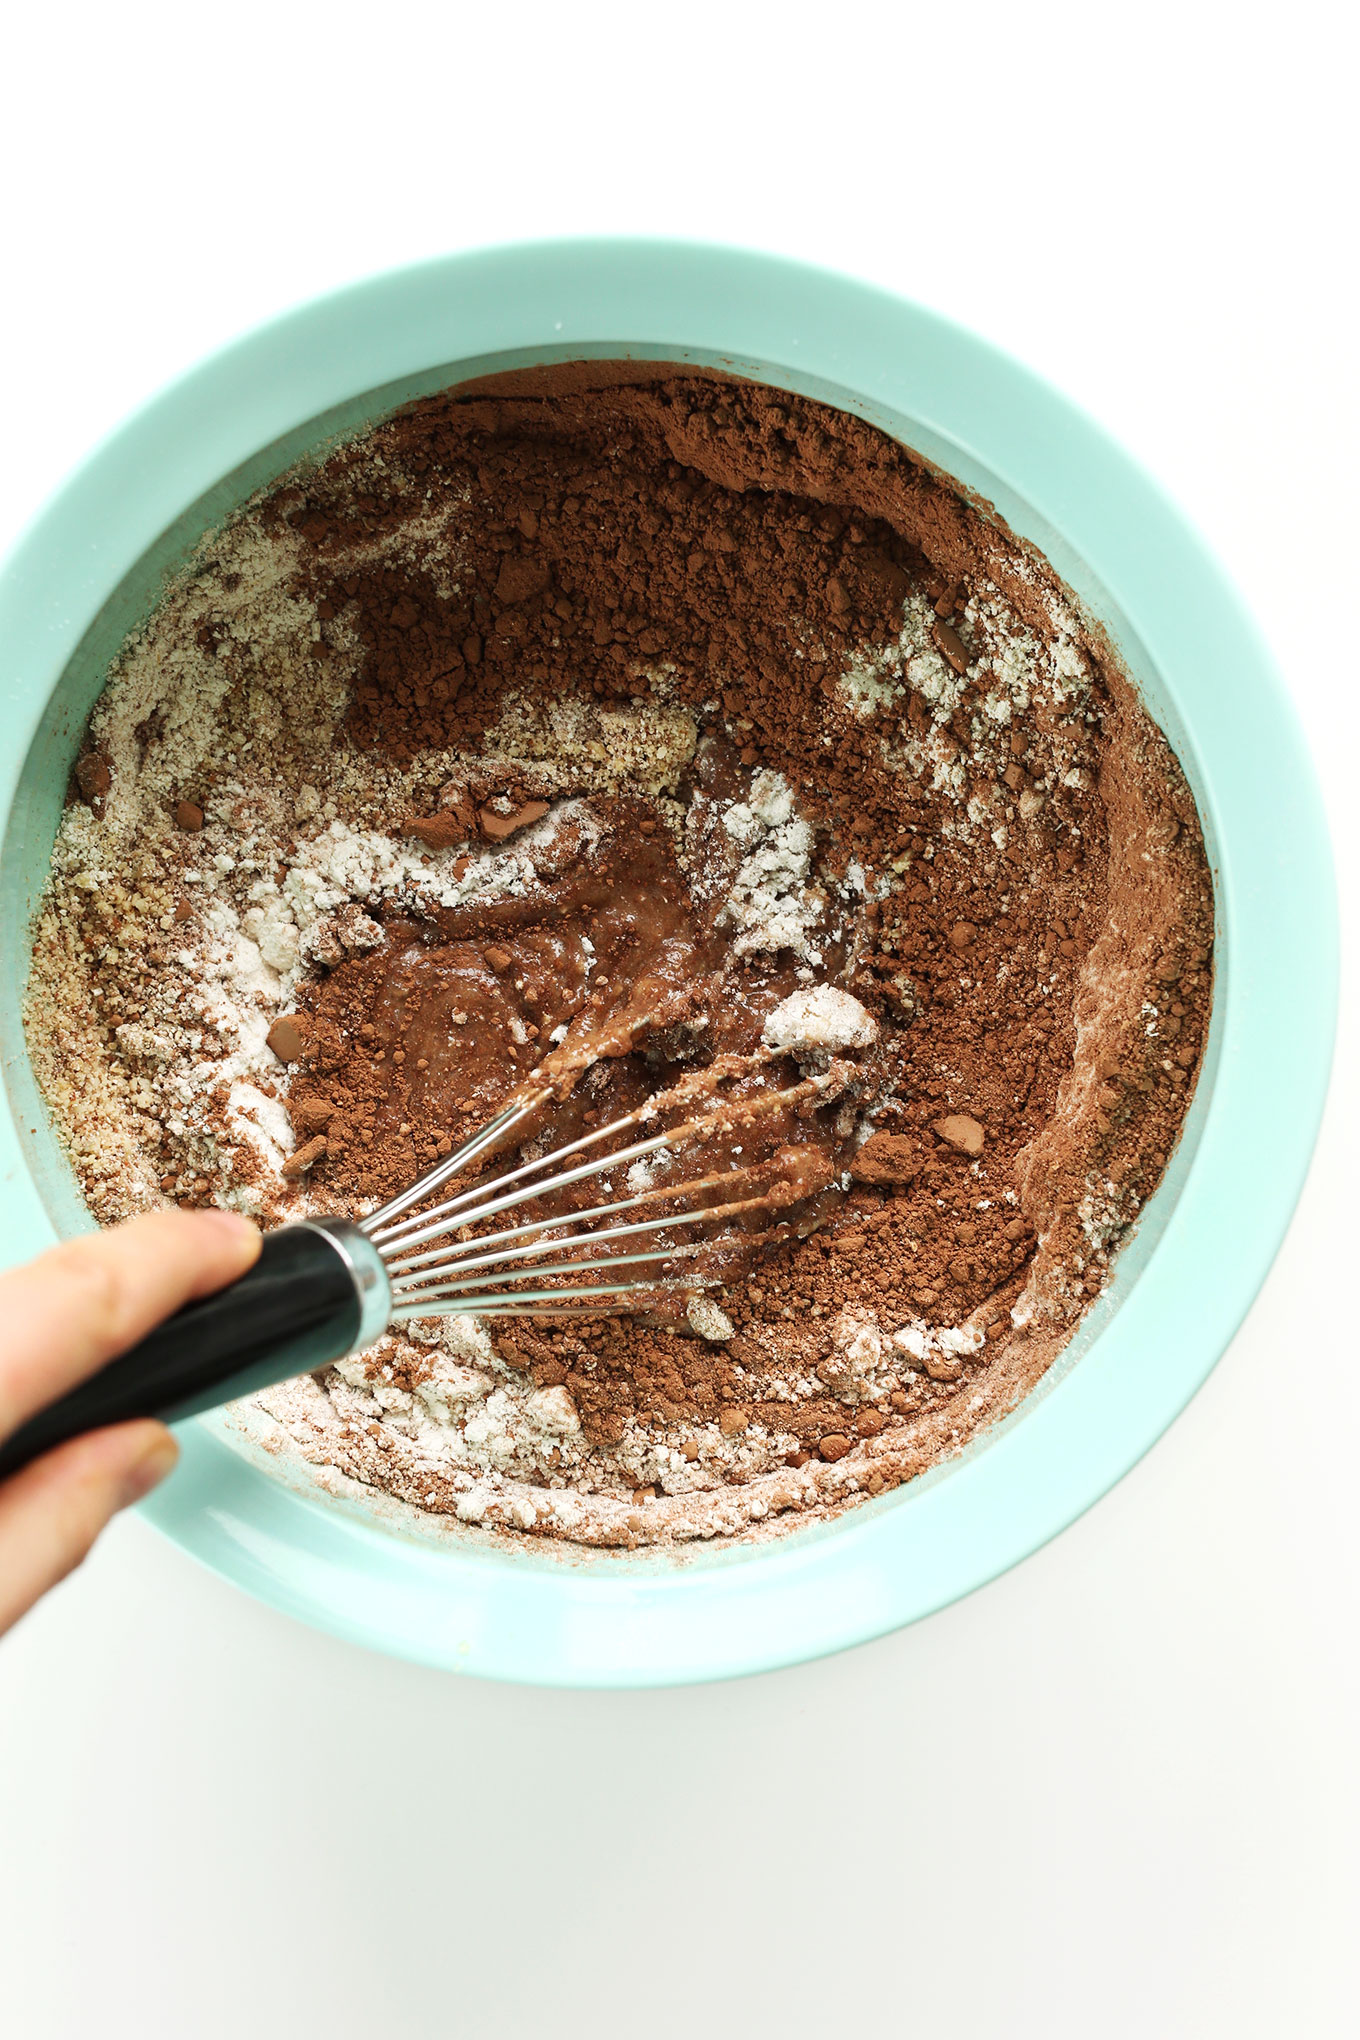 Mixing wet and dry ingredients for our easy Vegan Gluten-Free Chocolate Hazelnut Cake Recipe